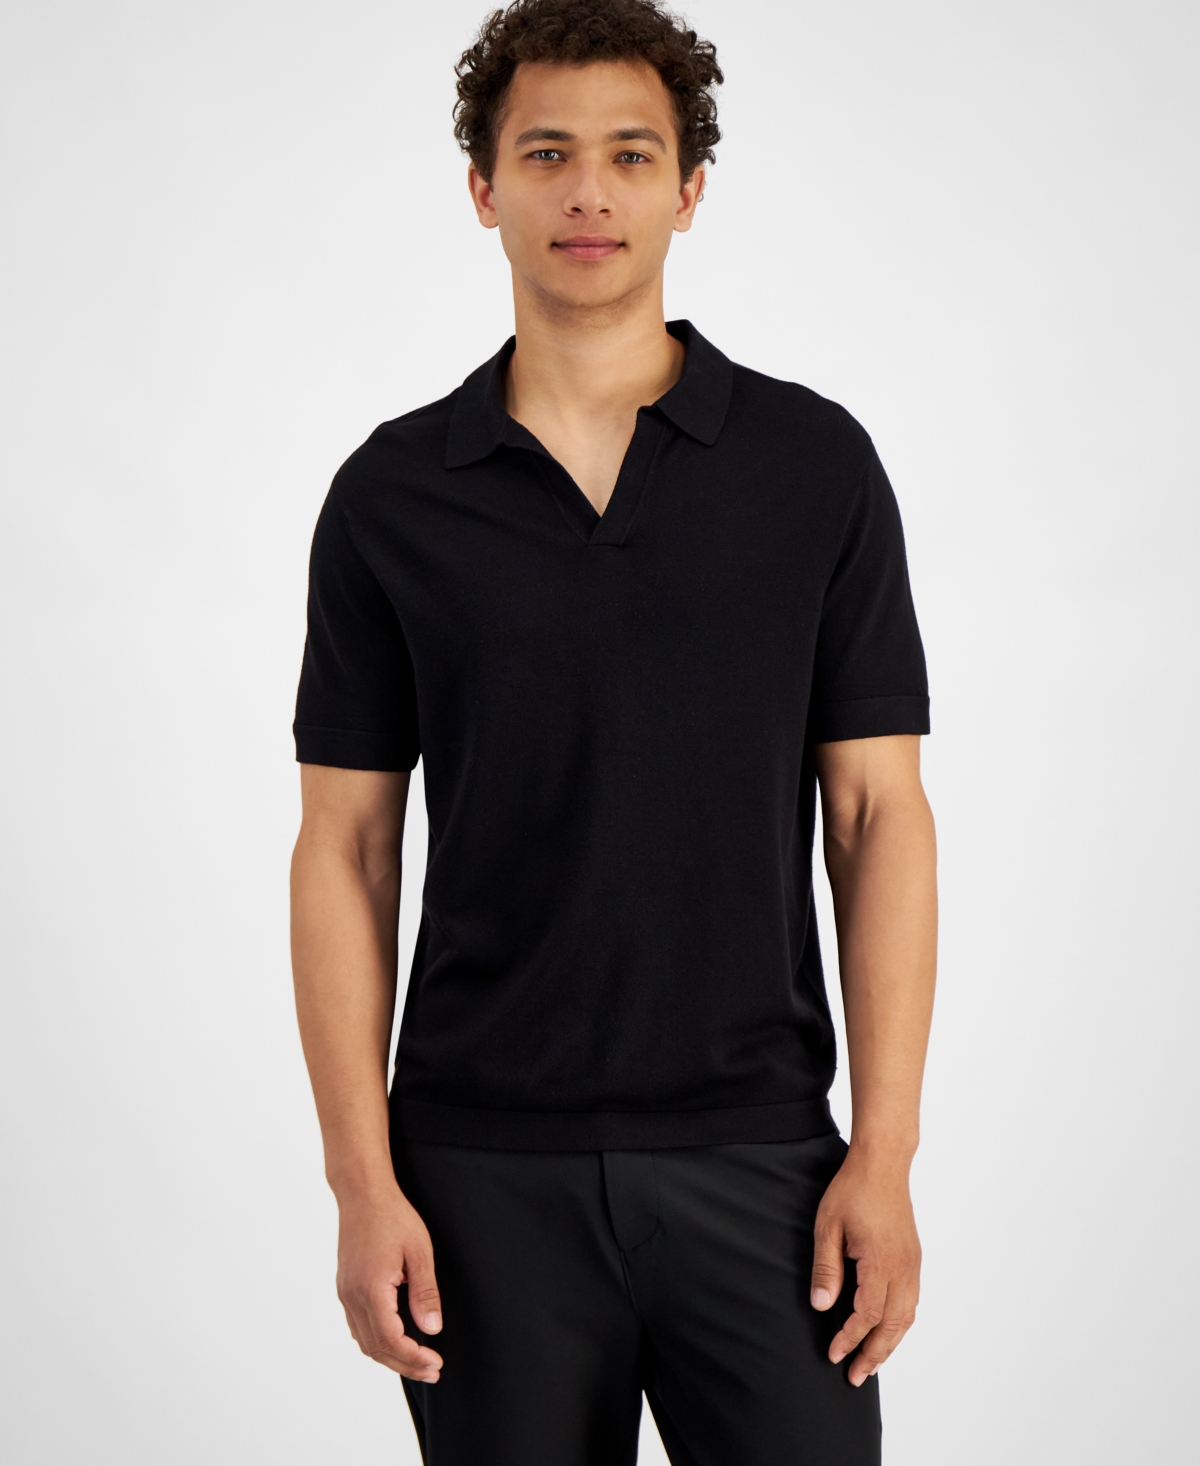 AND NOW THIS MEN'S REGULAR-FIT OPEN COLLAR SWEATER-KNIT POLO SHIRT, CREATED FOR MACY'S